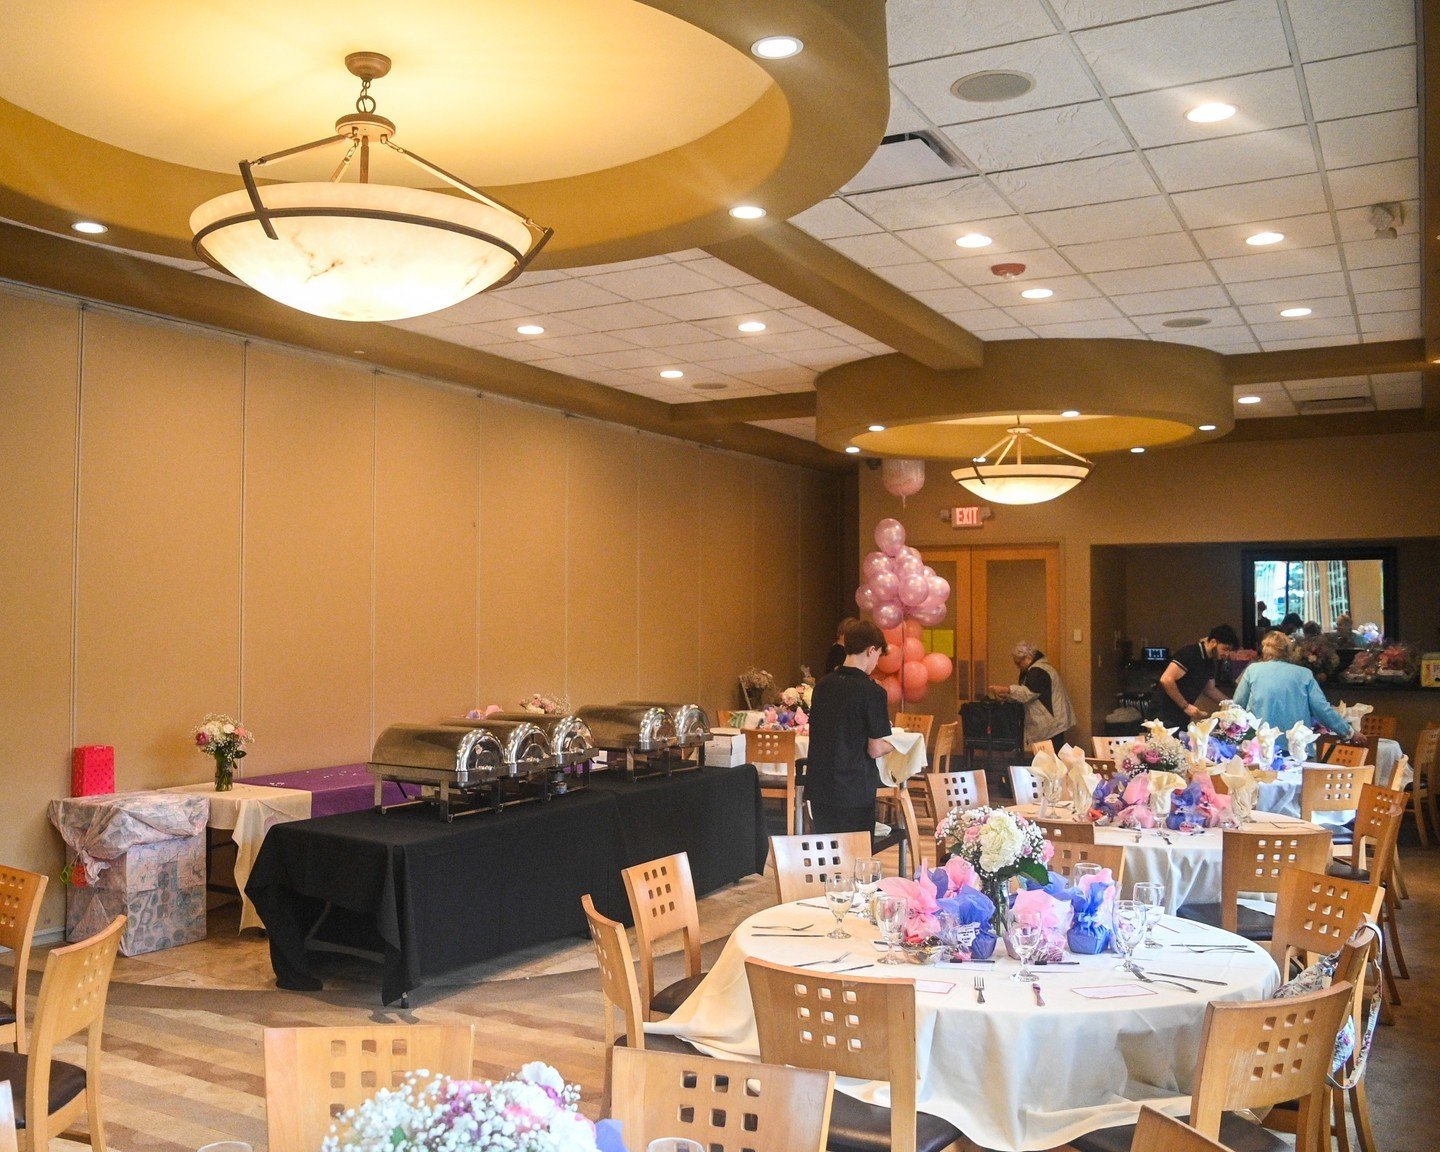 Don't forget about our private rooms at Ike's Restaurant! the perfect space for bridal showers, baby showers, family reunions and so much more! ⠀
⠀
Book your Private Event TODAY at Ike's Restaurant in Sterling Heights ✨⠀
👉 Call (586) 979-4460 to res